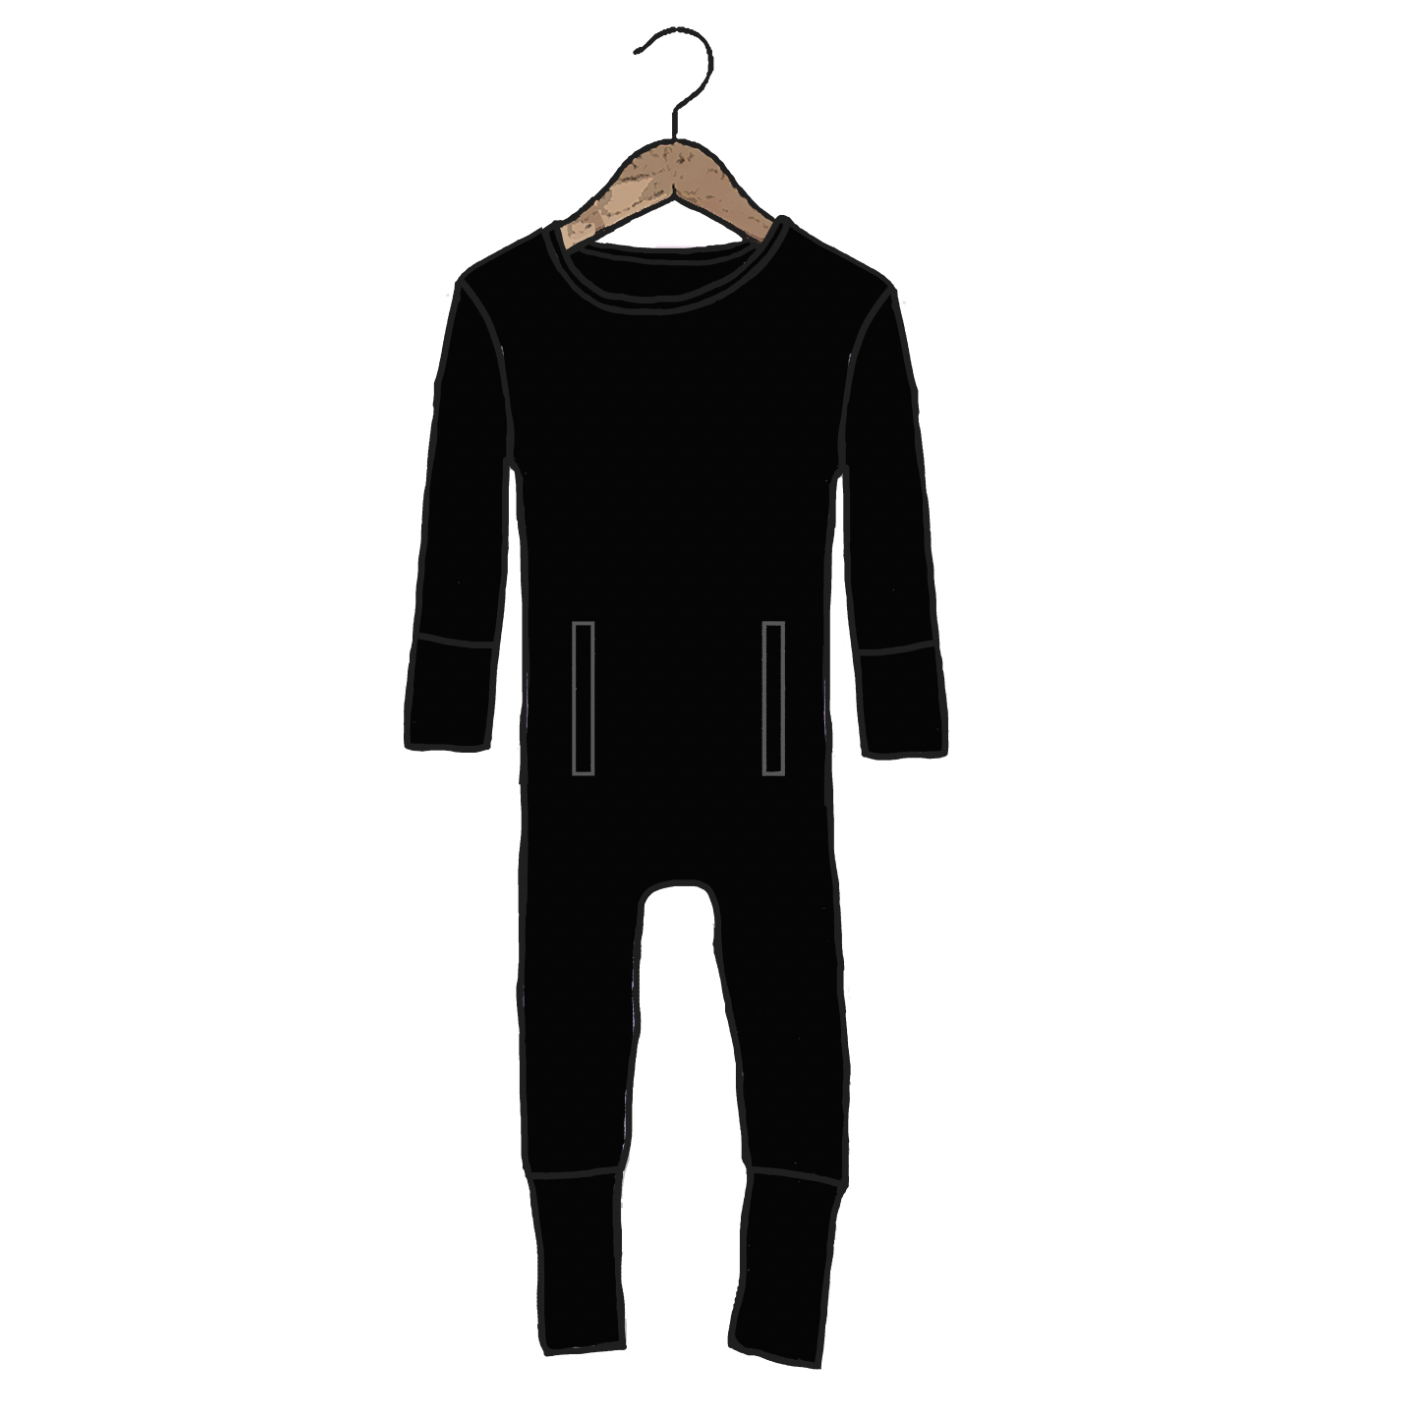 Black Adaptive Tube Access with snaps Kid's Day to Night Romper